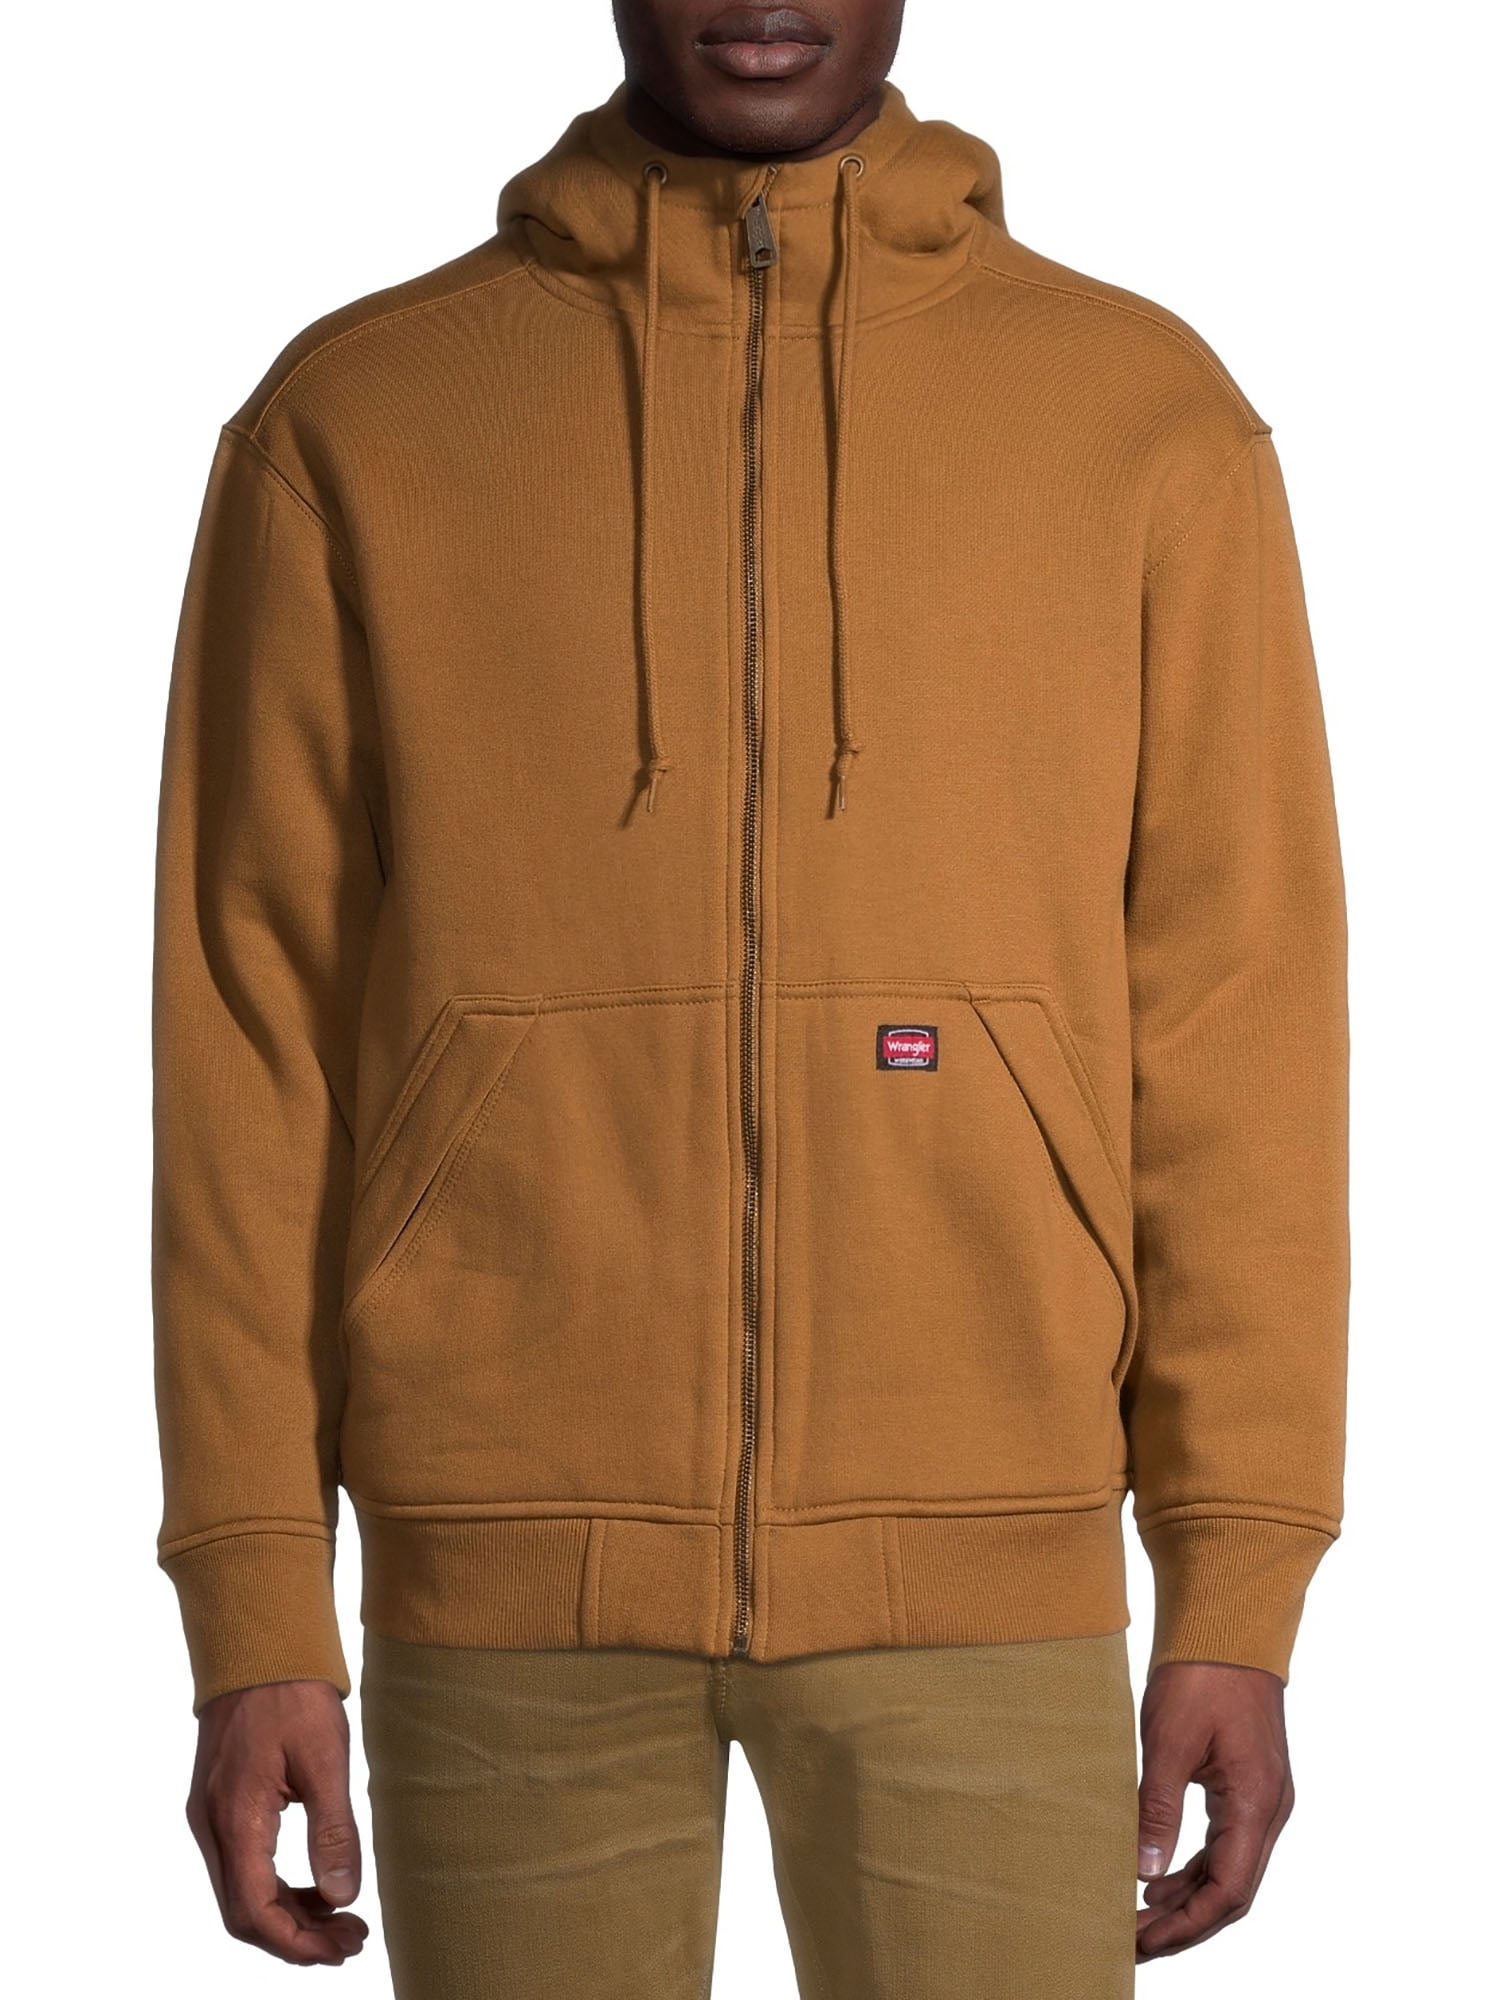 mirakel modstand Converge Wrangler Workwear Men's Guardian Heavy Weight Faux Sherpa and Quilt Lined  Hoodie - Walmart.com